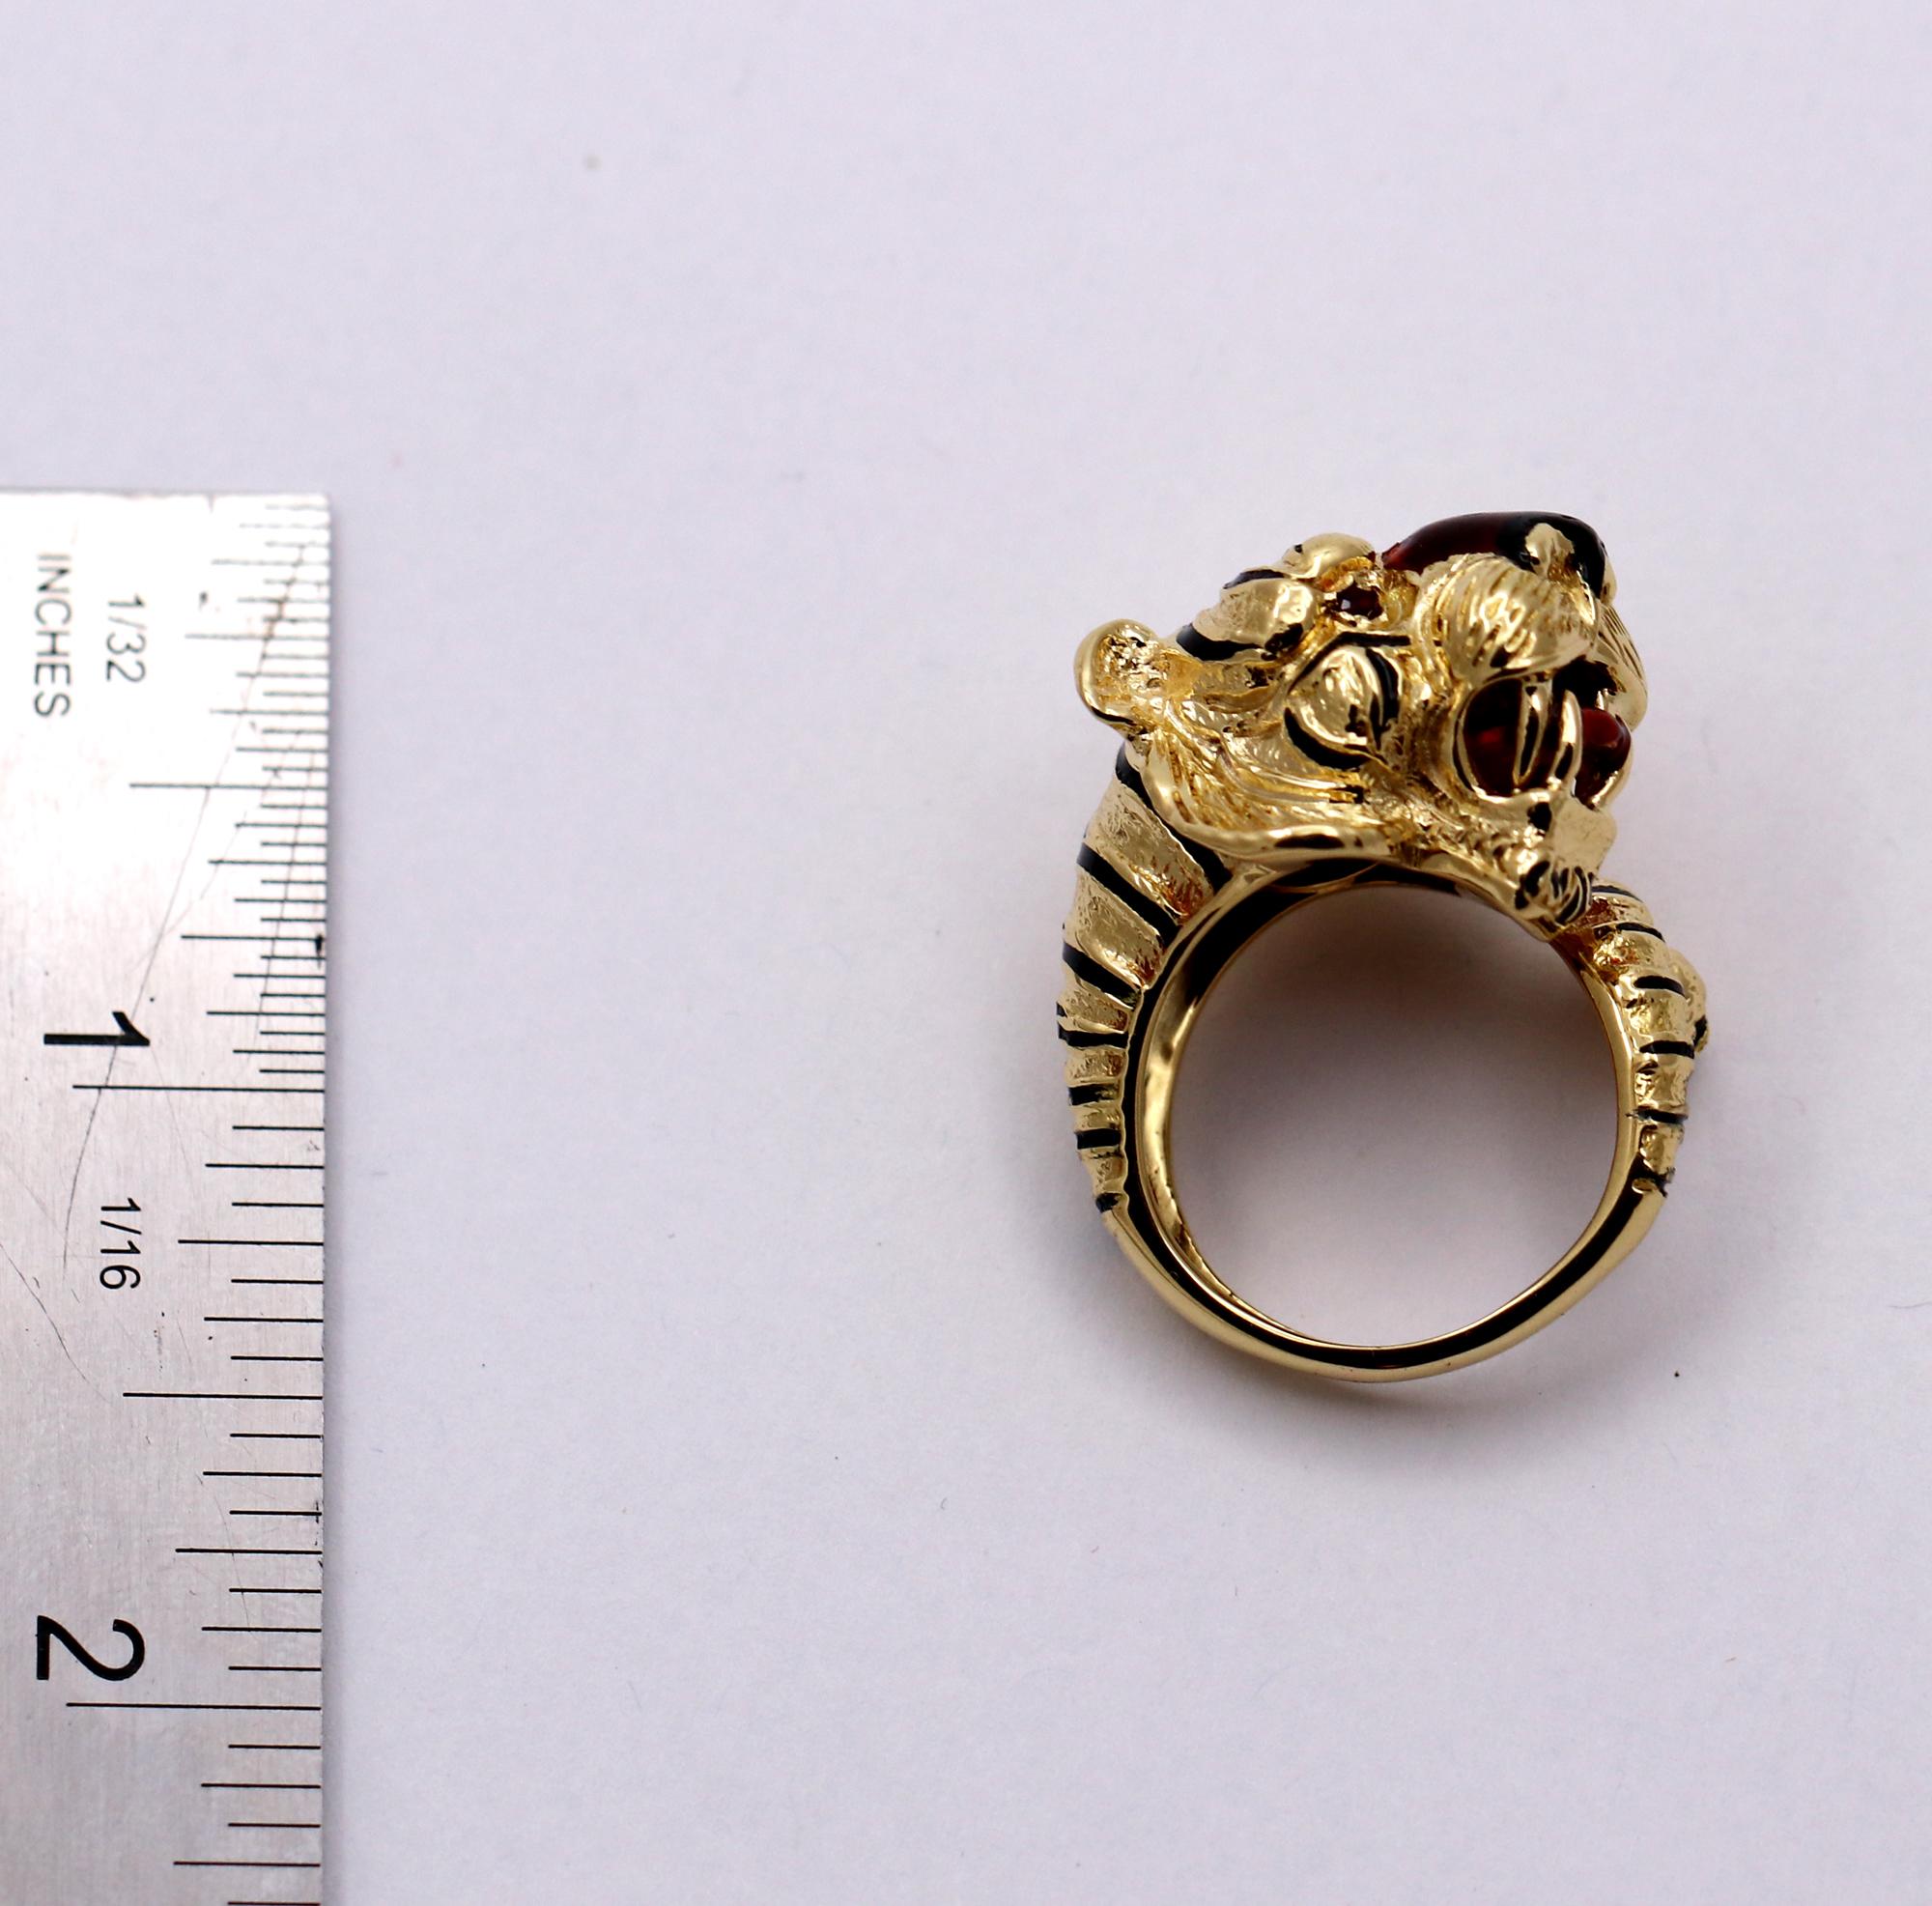 Frascarolo Gold and Enamel Tiger Ring with Ruby Eyes 3